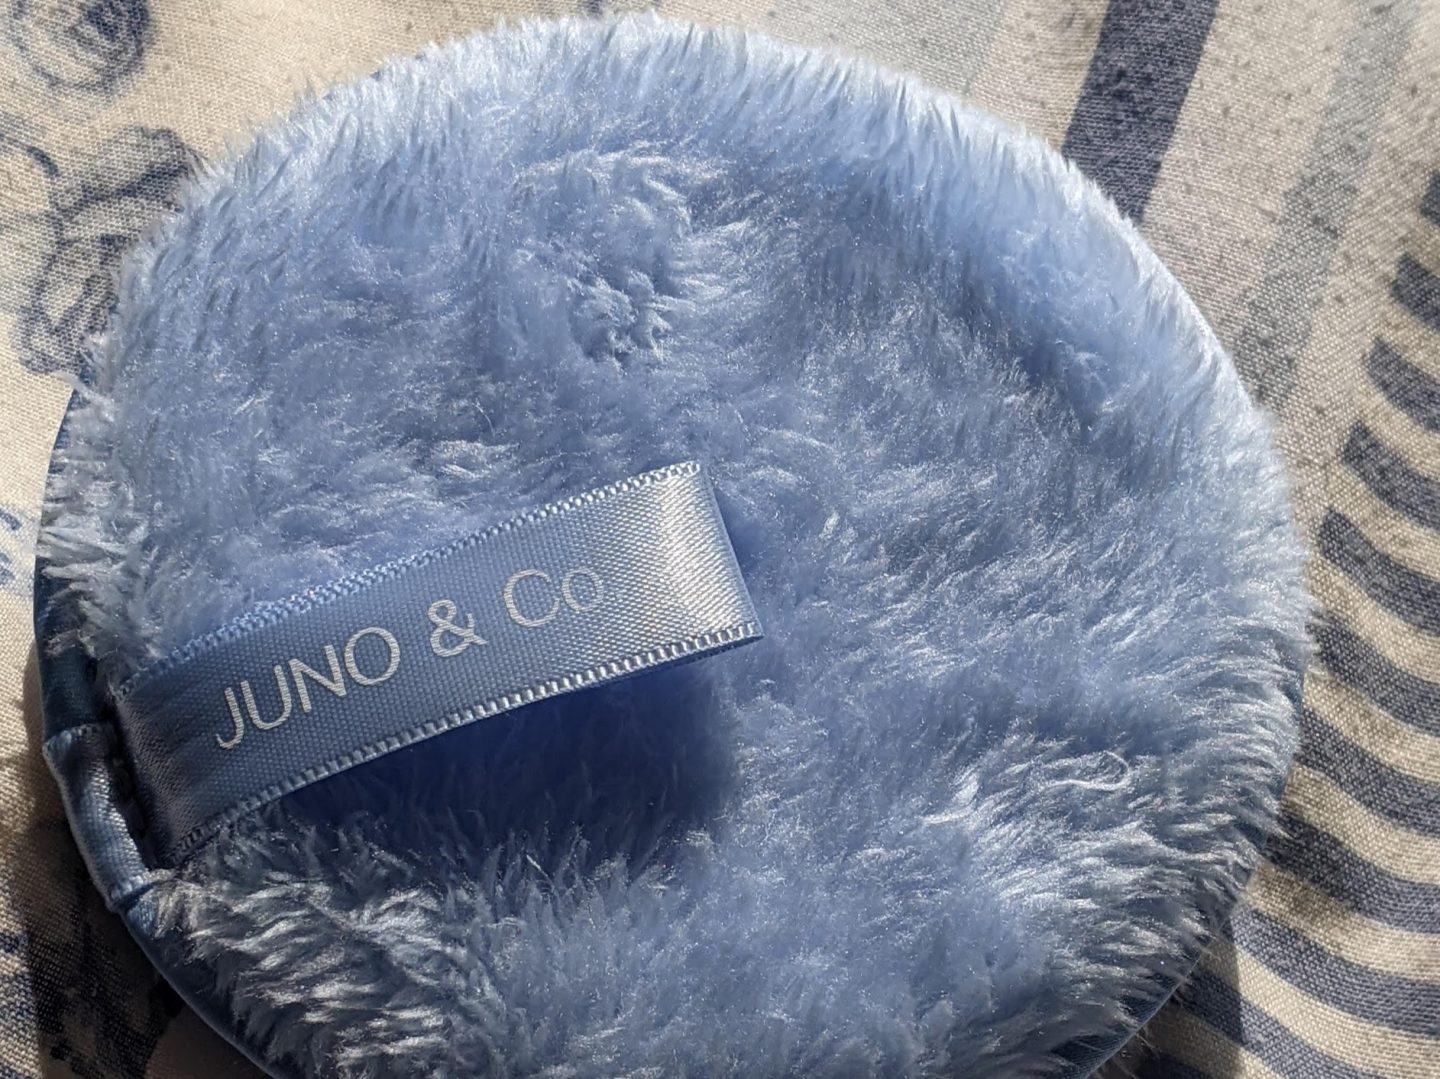 JUNOCO Cleansing cloth